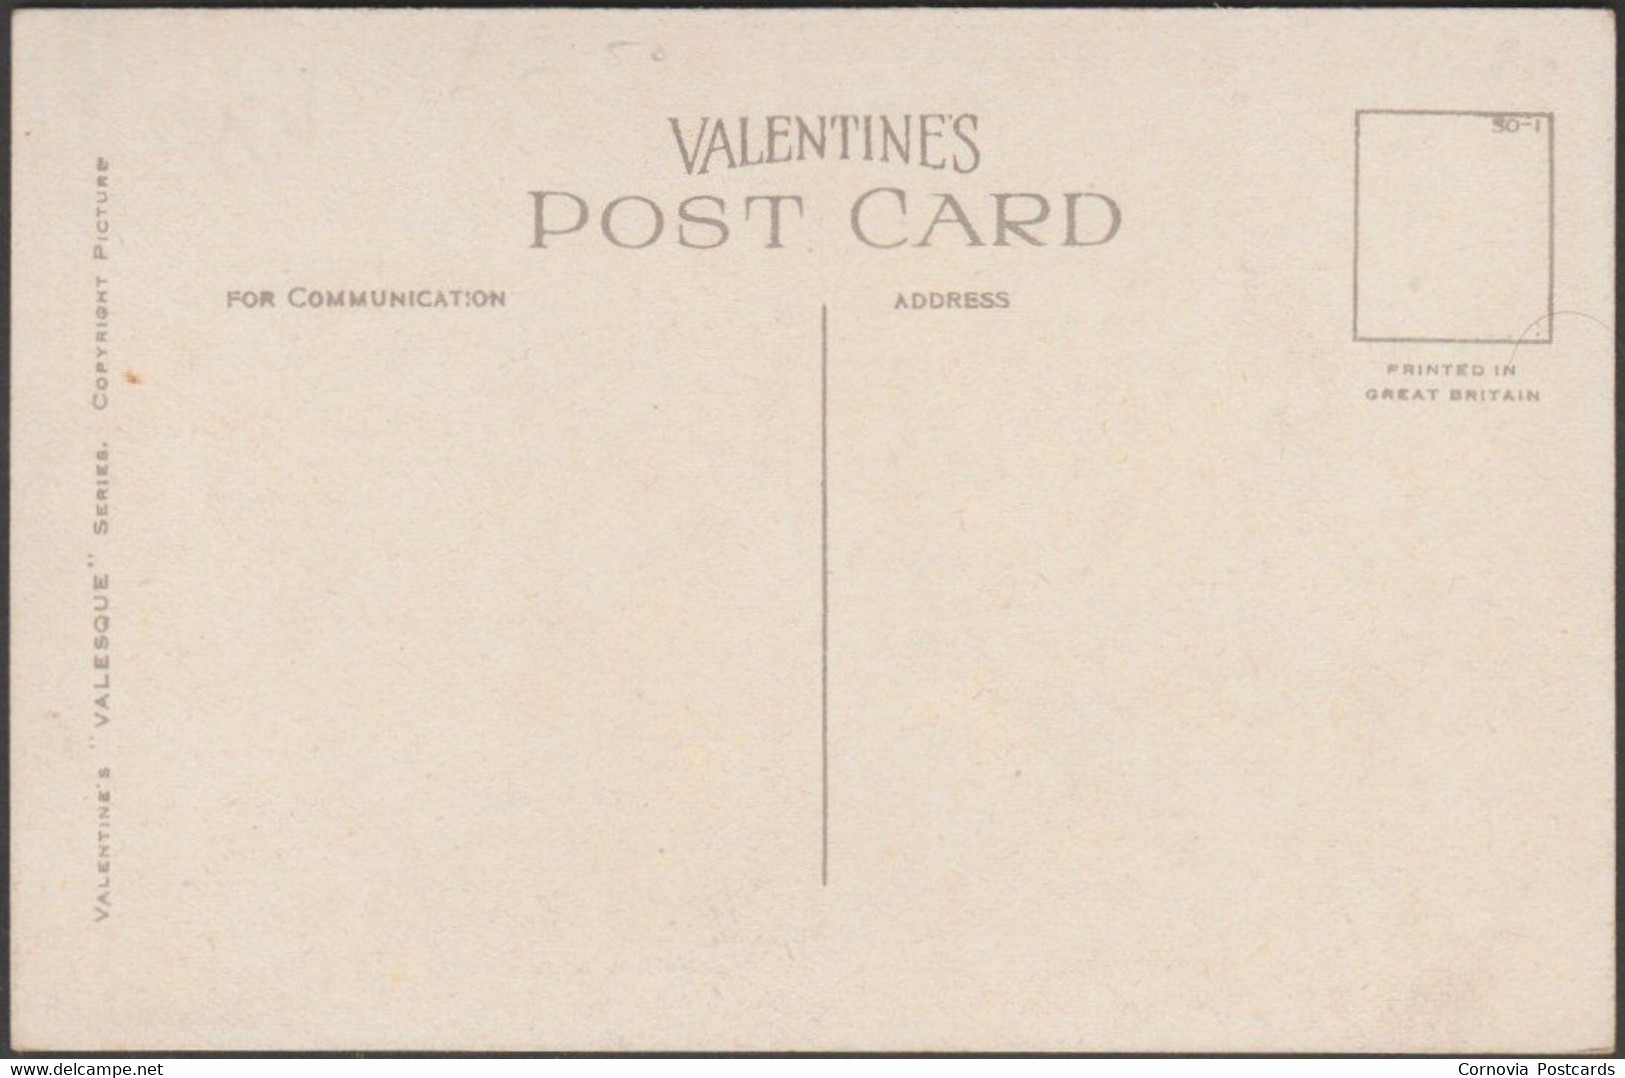 Lands End With First And Last House, Cornwall, 1930 - Valentine's Postcard - Land's End